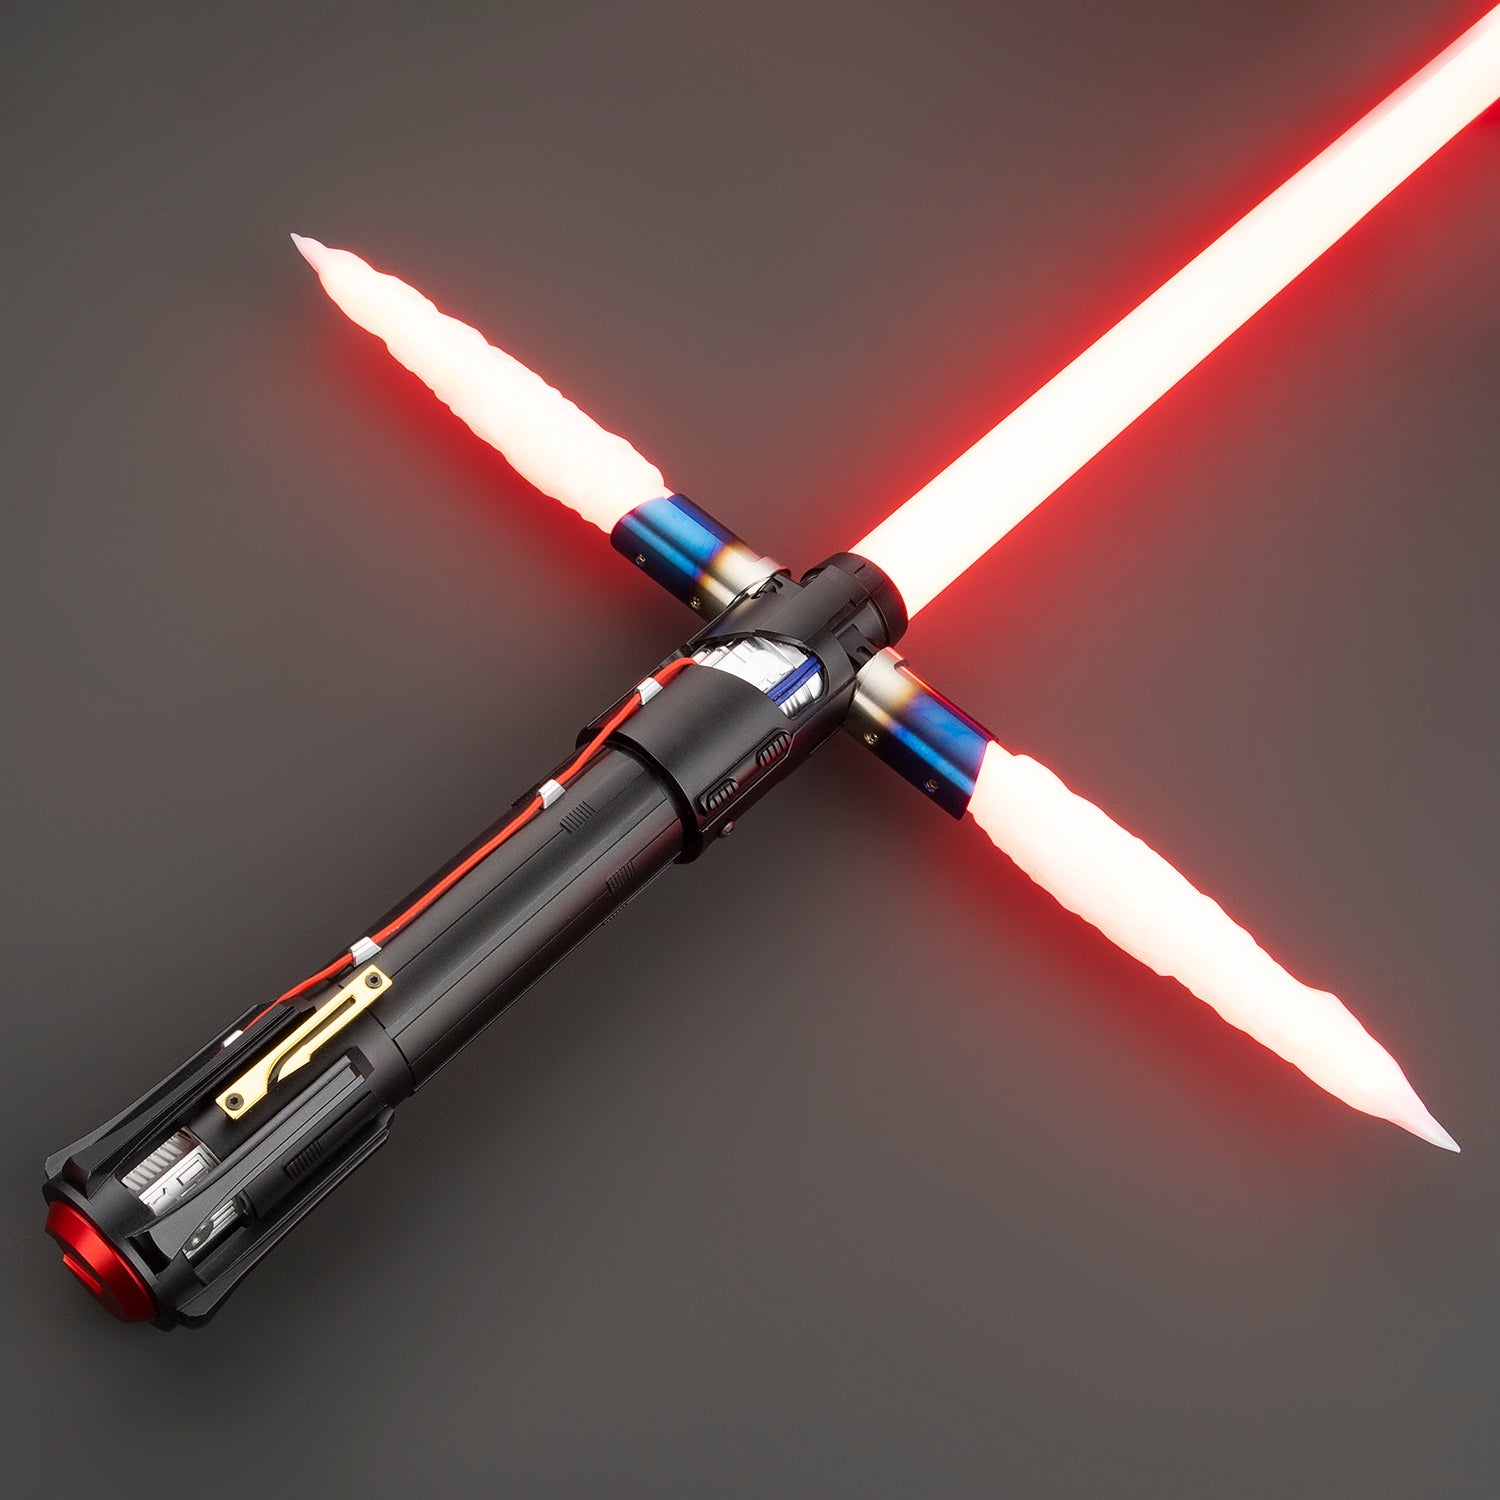 Tainted Saber (KR Inspired)